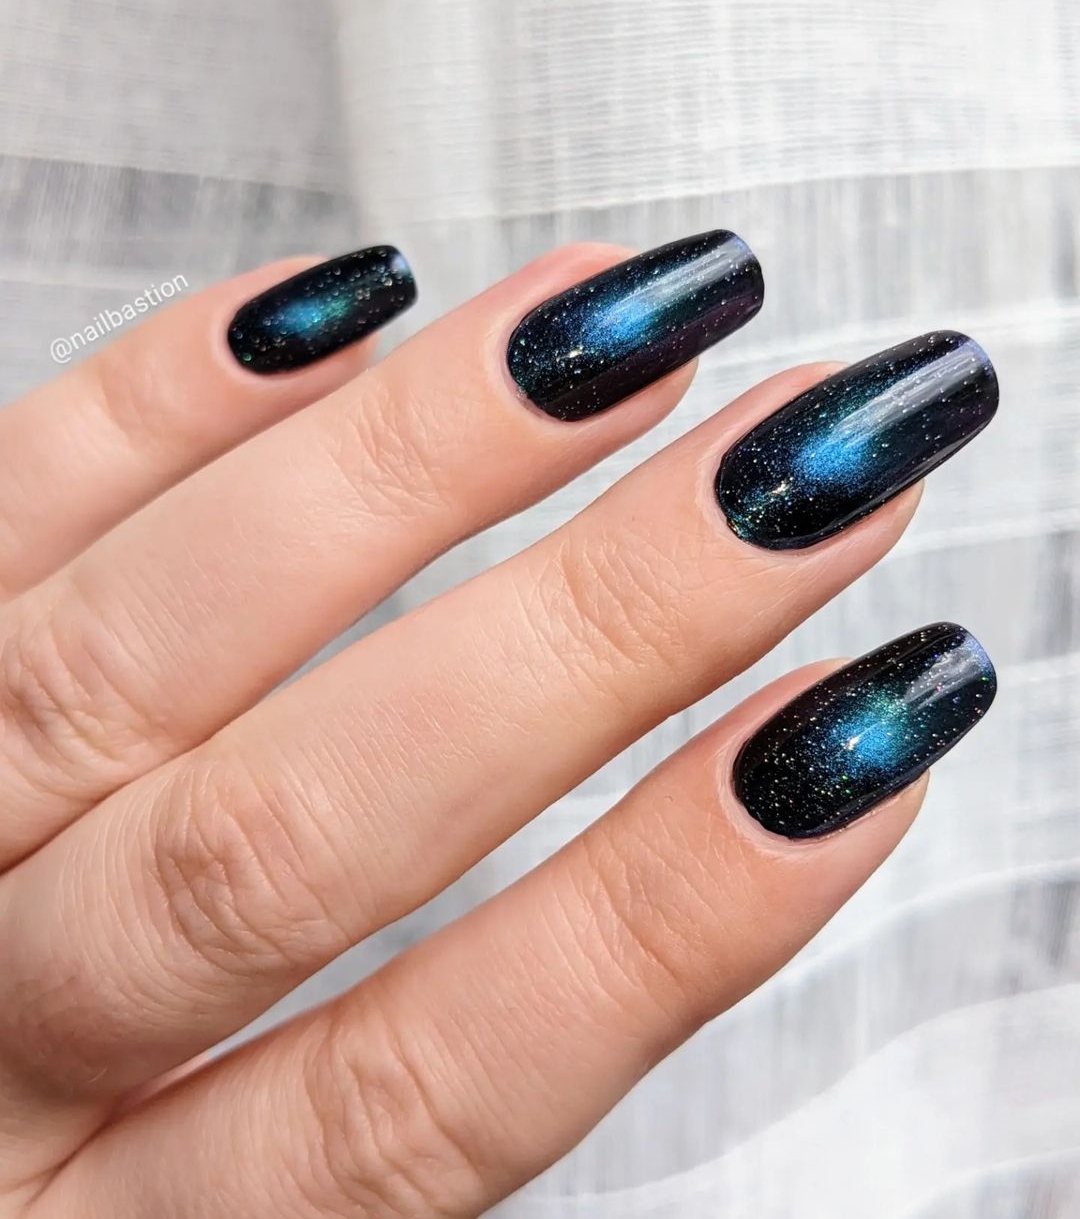 Black Nails with Blue Can Eye Design1 Long Square Black French Tip Nails